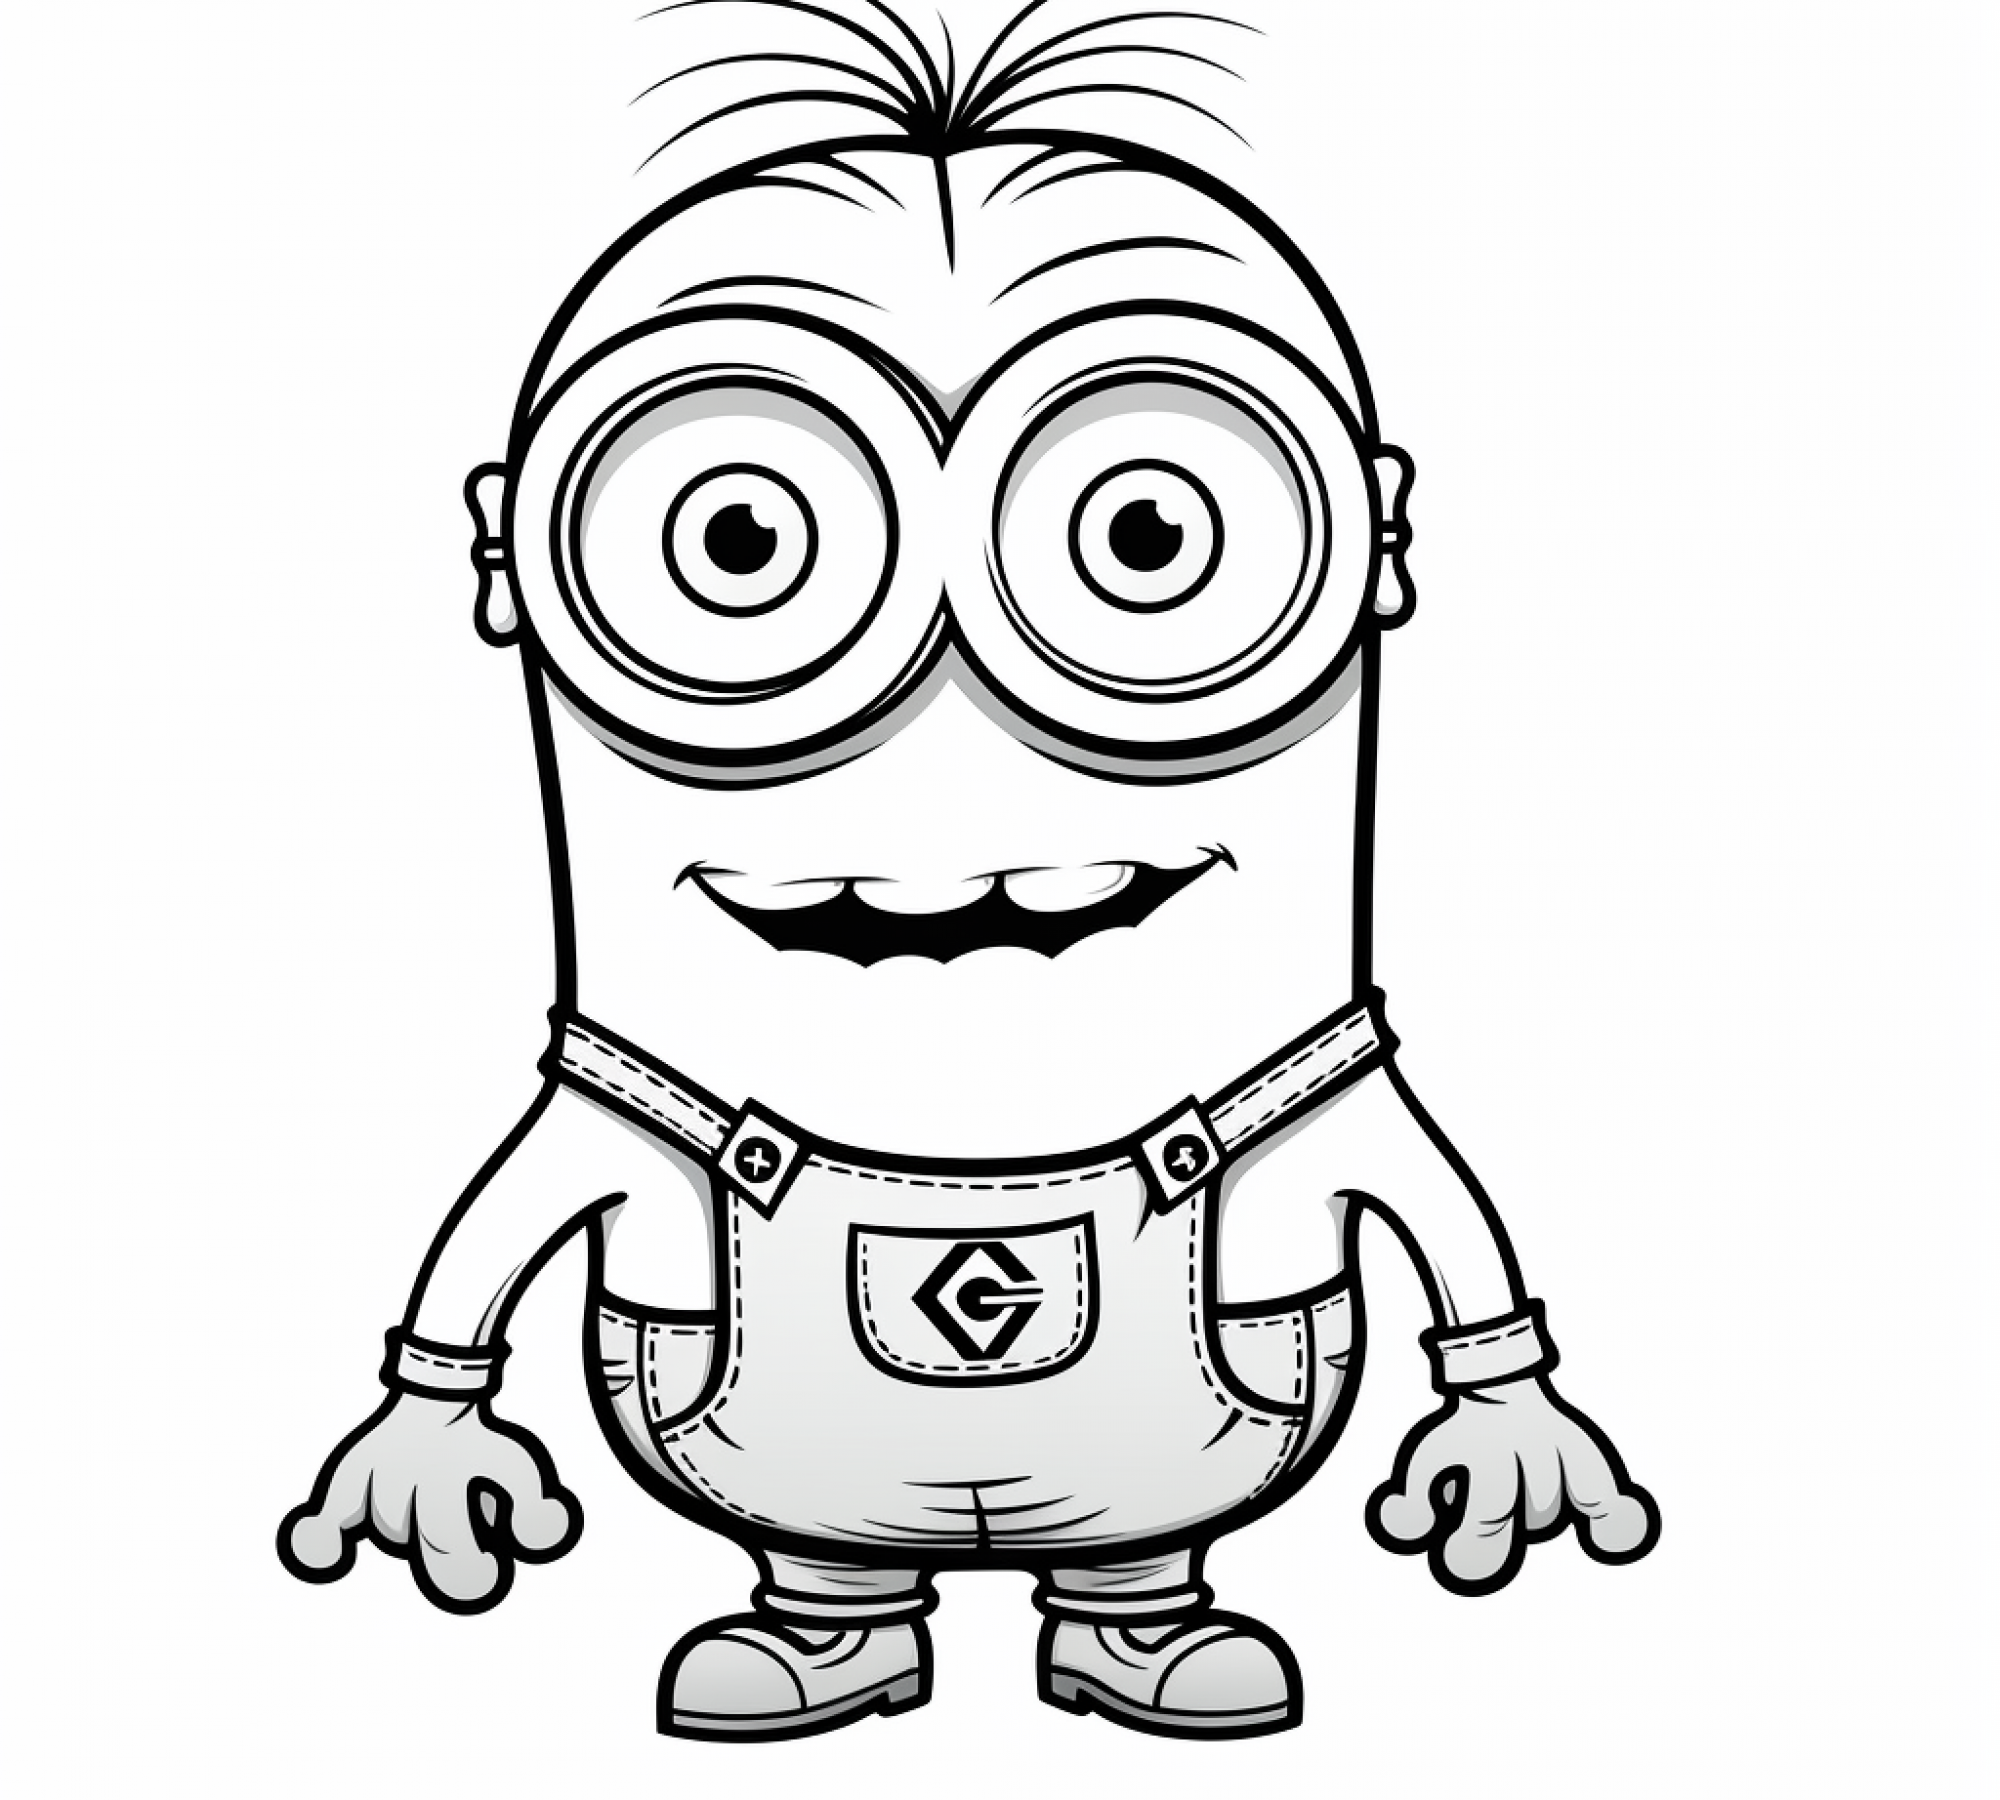 Free printable coloring pages of Minions